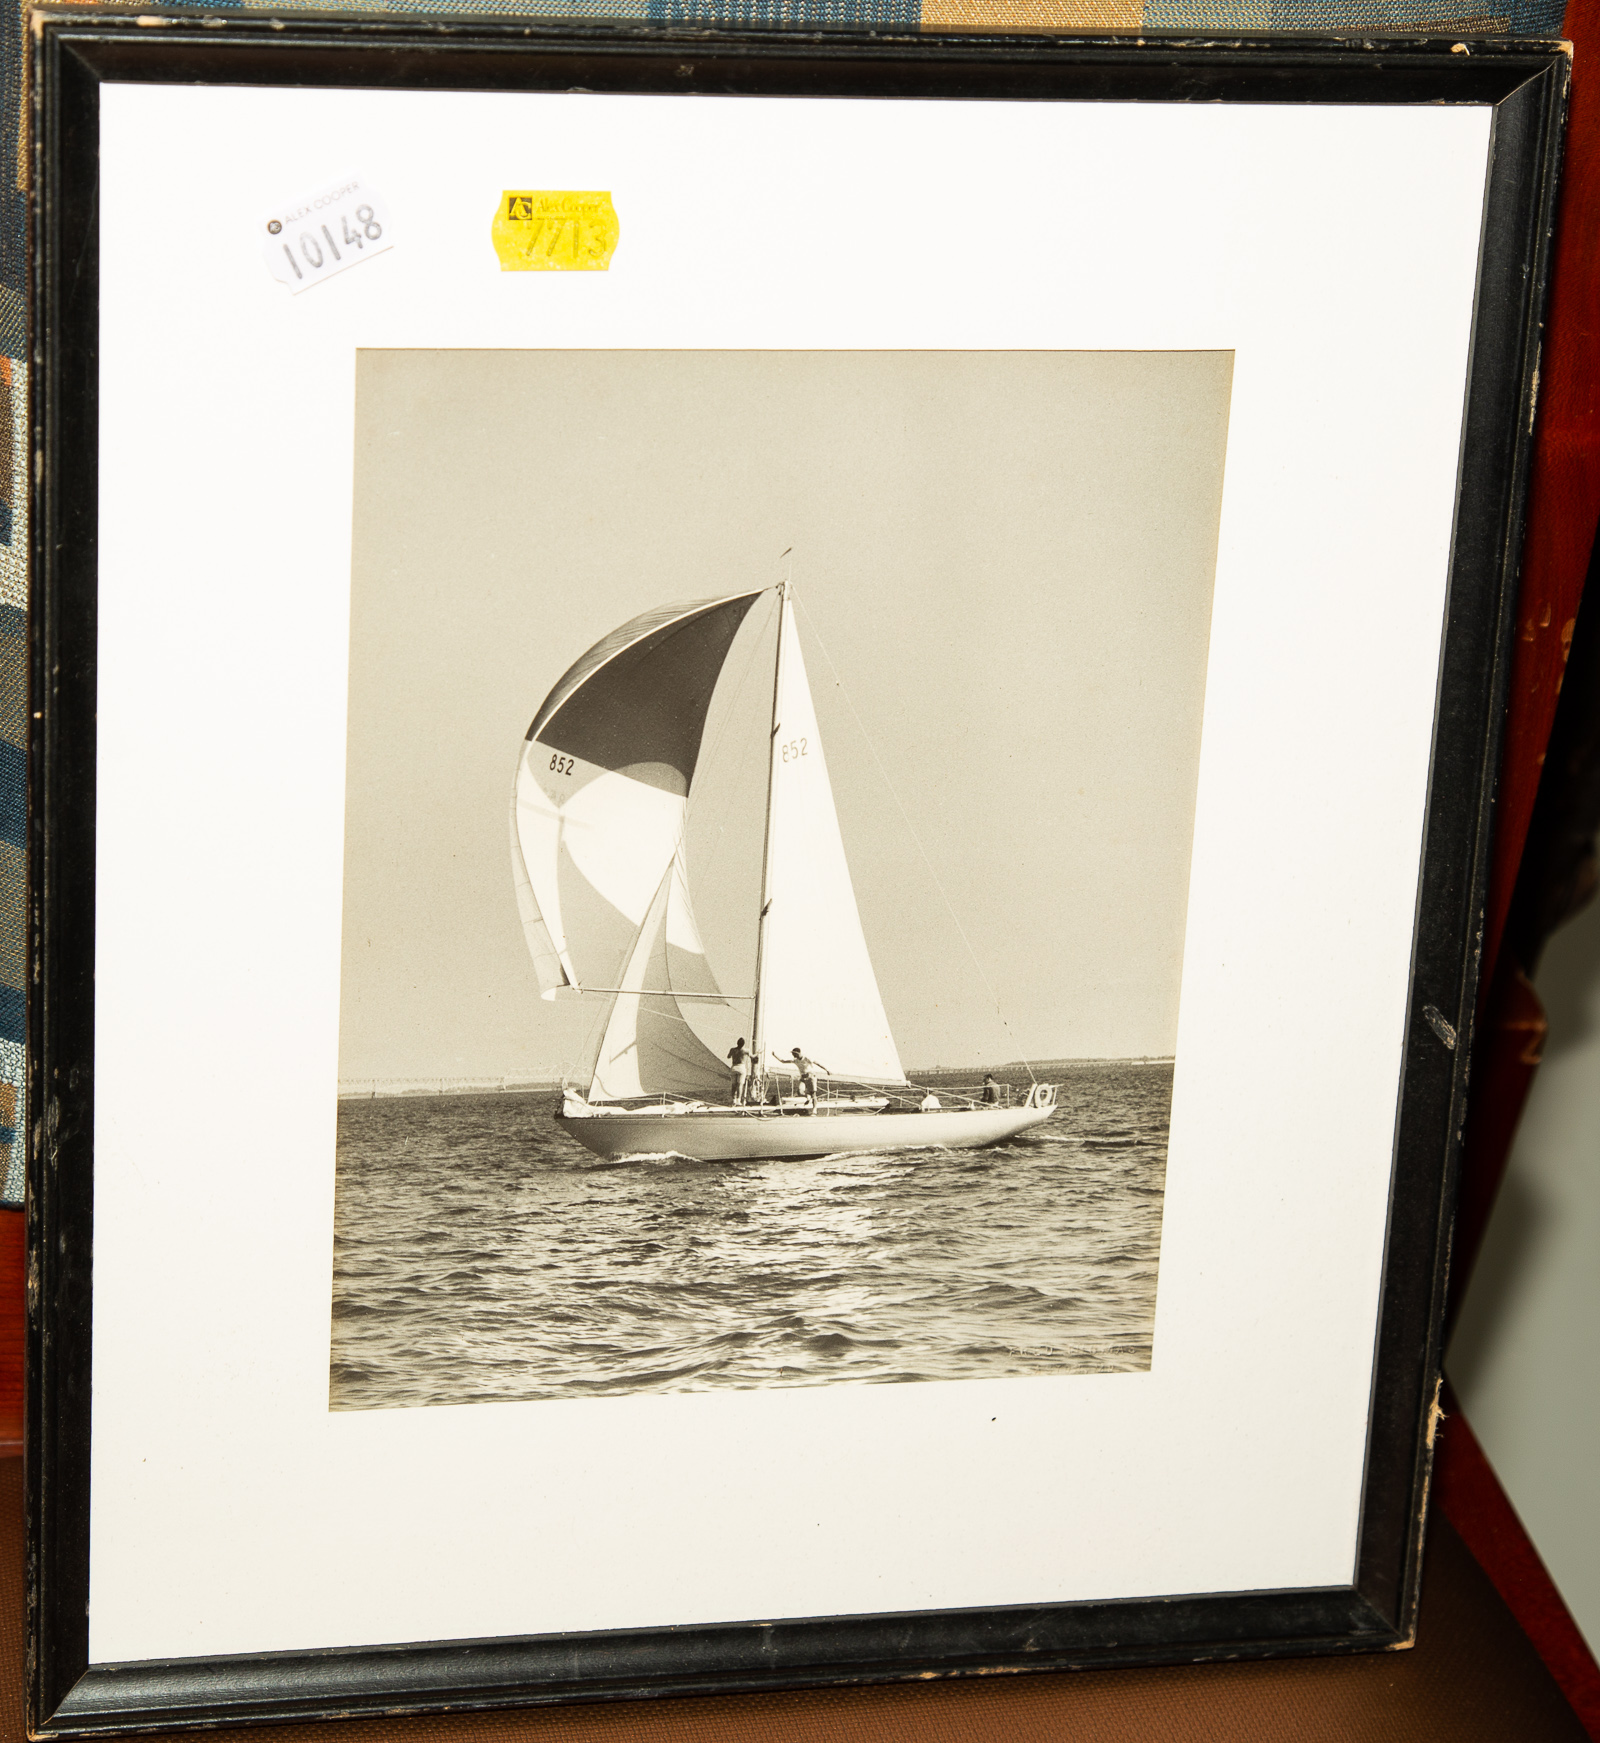 FRAMED PHOTOGRAPH OF A SAILBOAT 289840